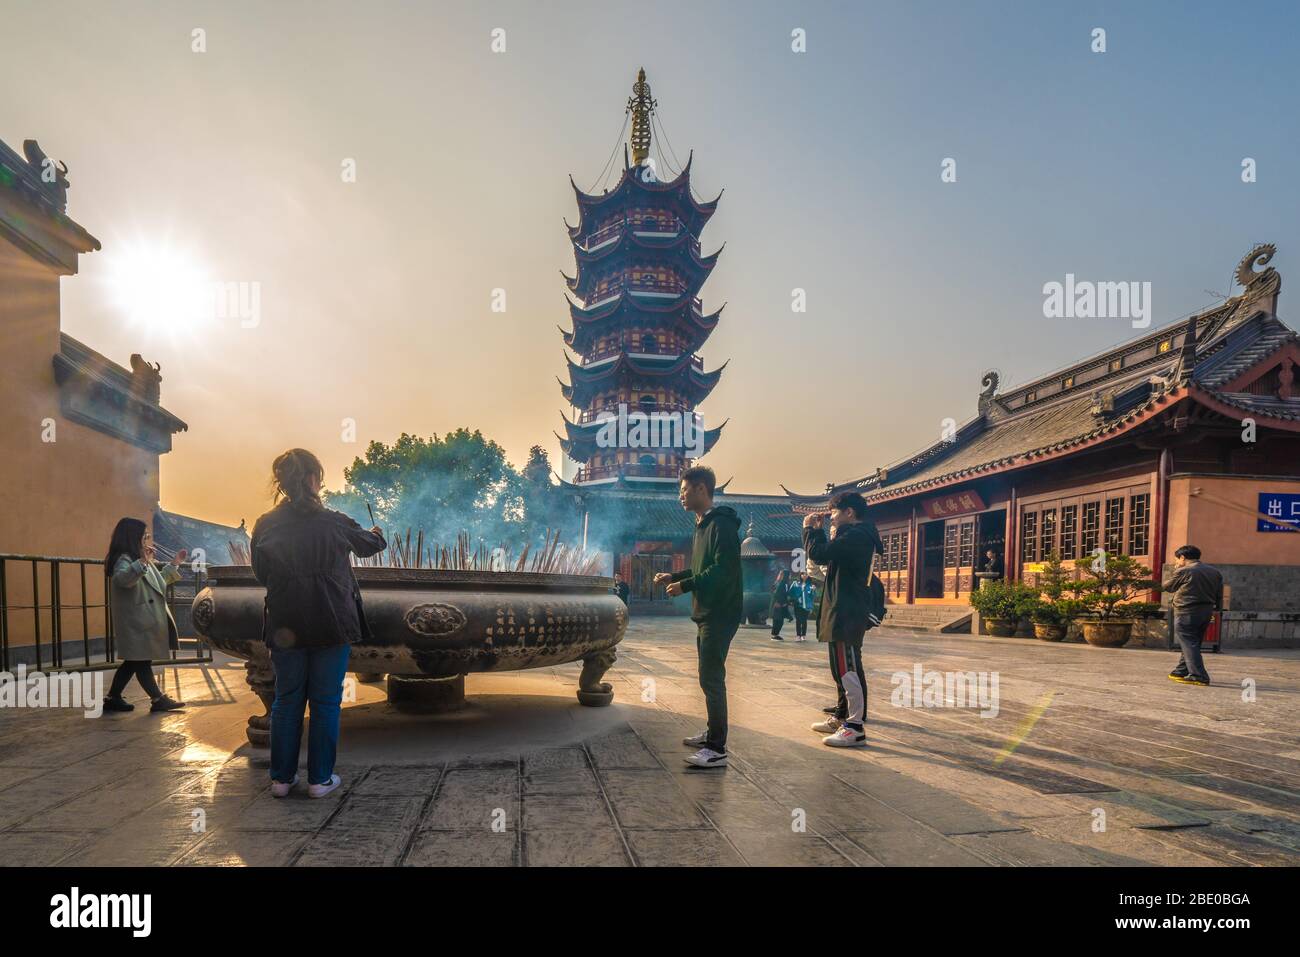 NANJING, CHINA - NOVEMBER 08: This is Jiming temple, a famous buddhist temple and popular tourist destination on November 08, 2019 in Nanjing Stock Photo